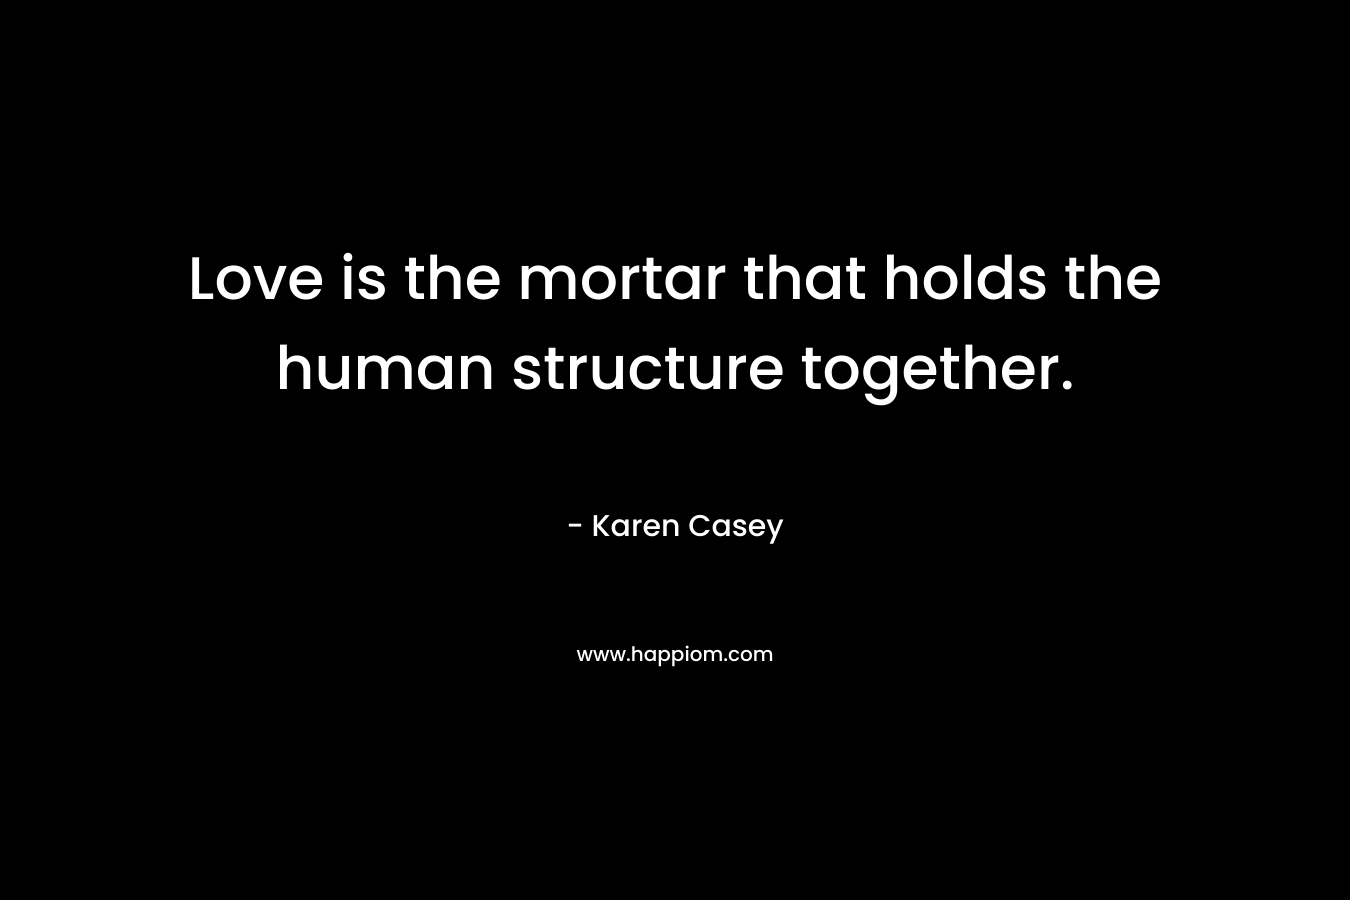 Love is the mortar that holds the human structure together. – Karen Casey